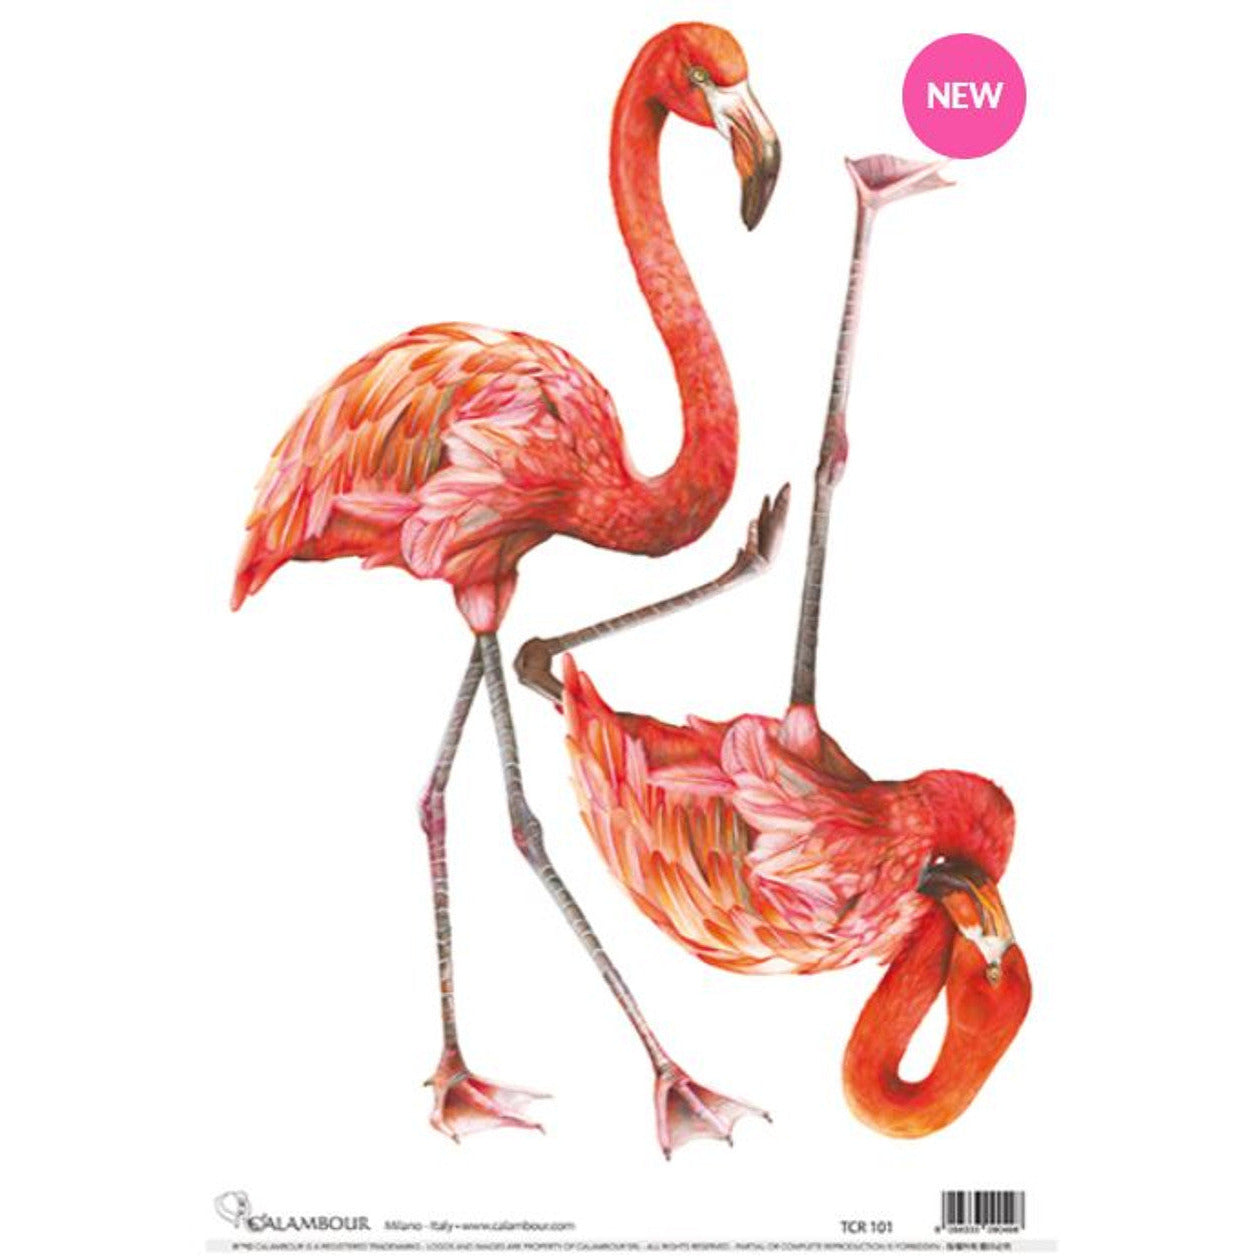 TCR 101-A3 - Decoupage Rice Paper - Calambour Two Flamingos